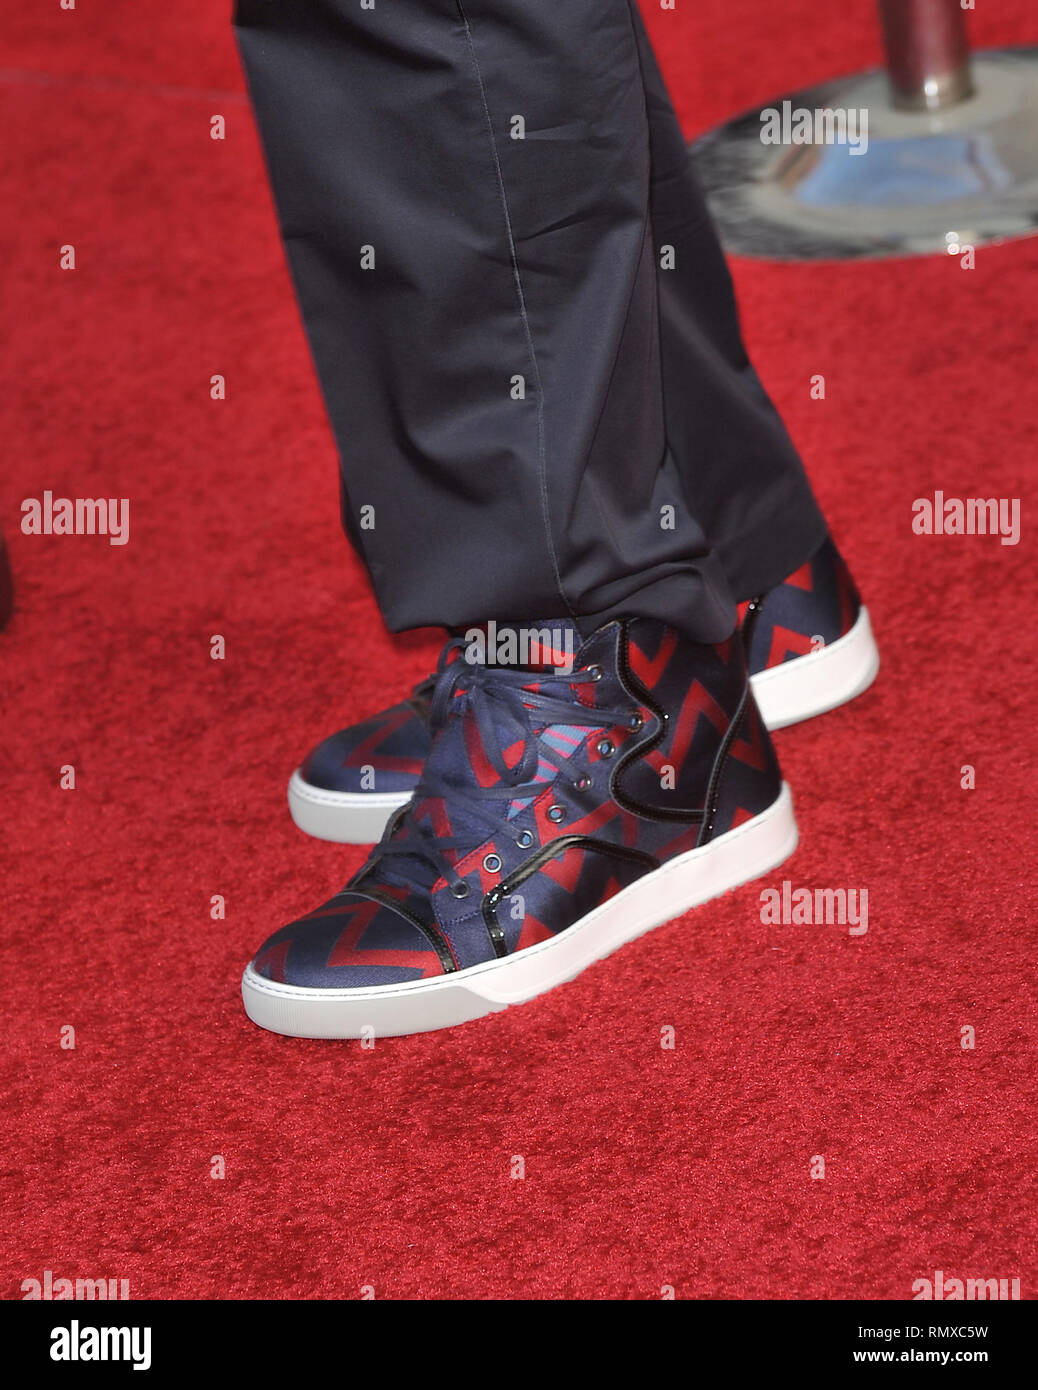 Robert Downey jr shoes 23 - Iron Man 2 Premiere at the El Capitan Theatre  In Los  Downey jr shoes 23 Event in Hollywood Life -  California, Red Carpet and backstage,